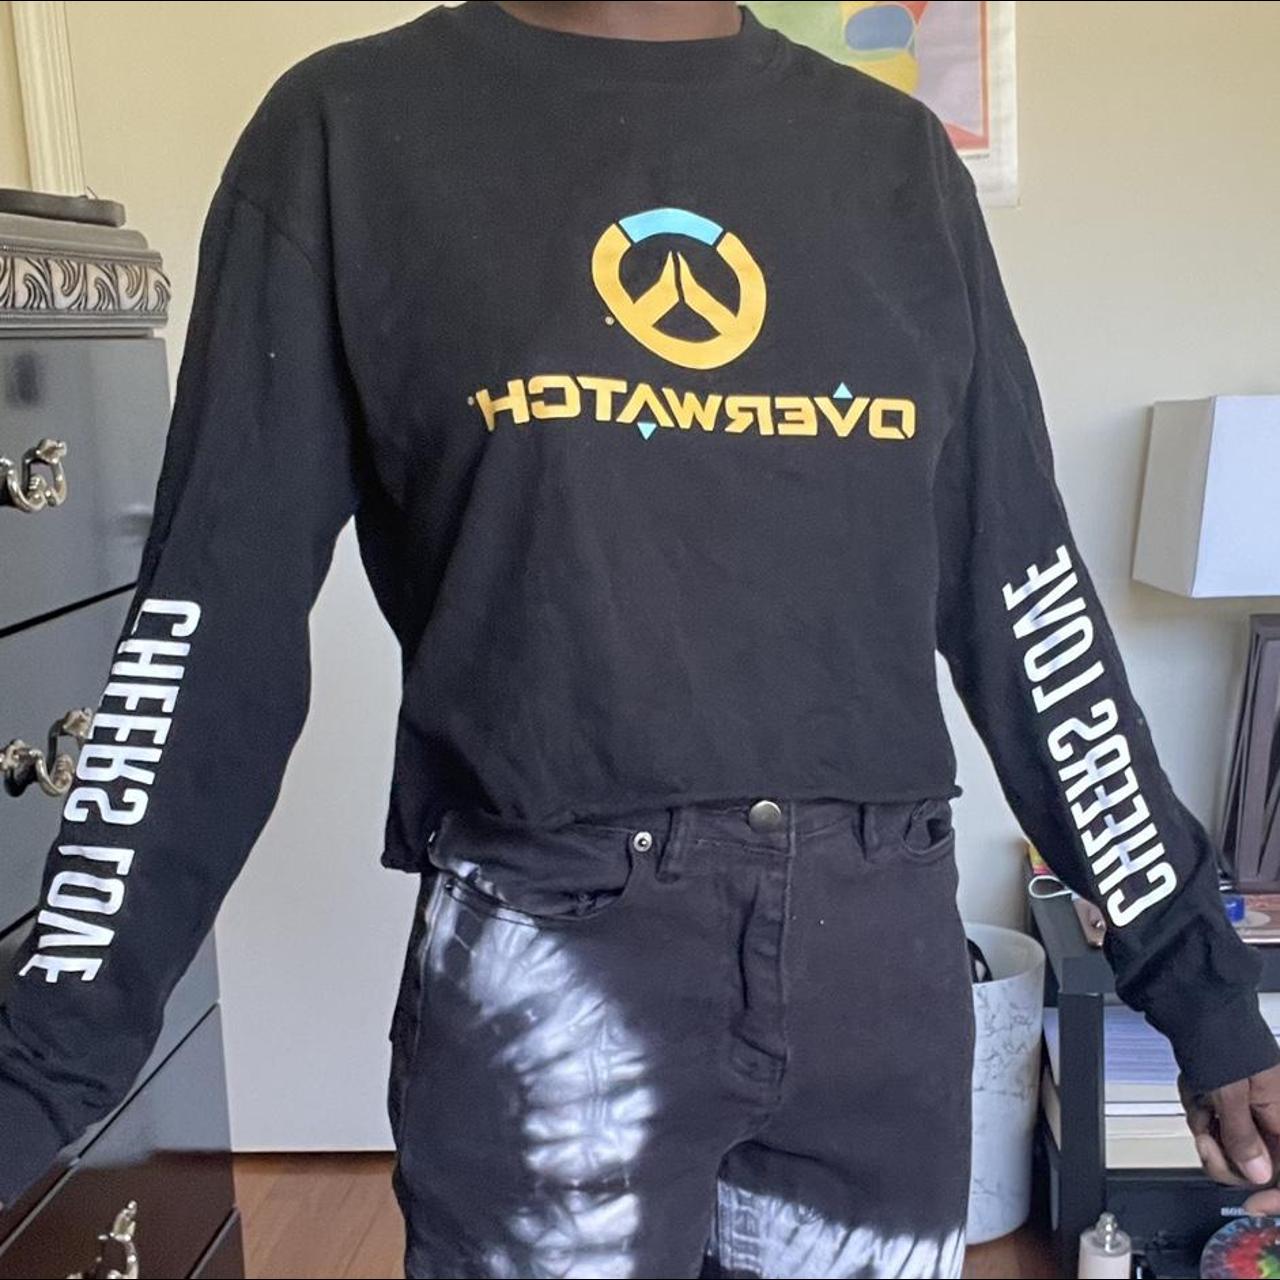 Product Image 3 - Overwatch long sleeve shirt
Fast shipping